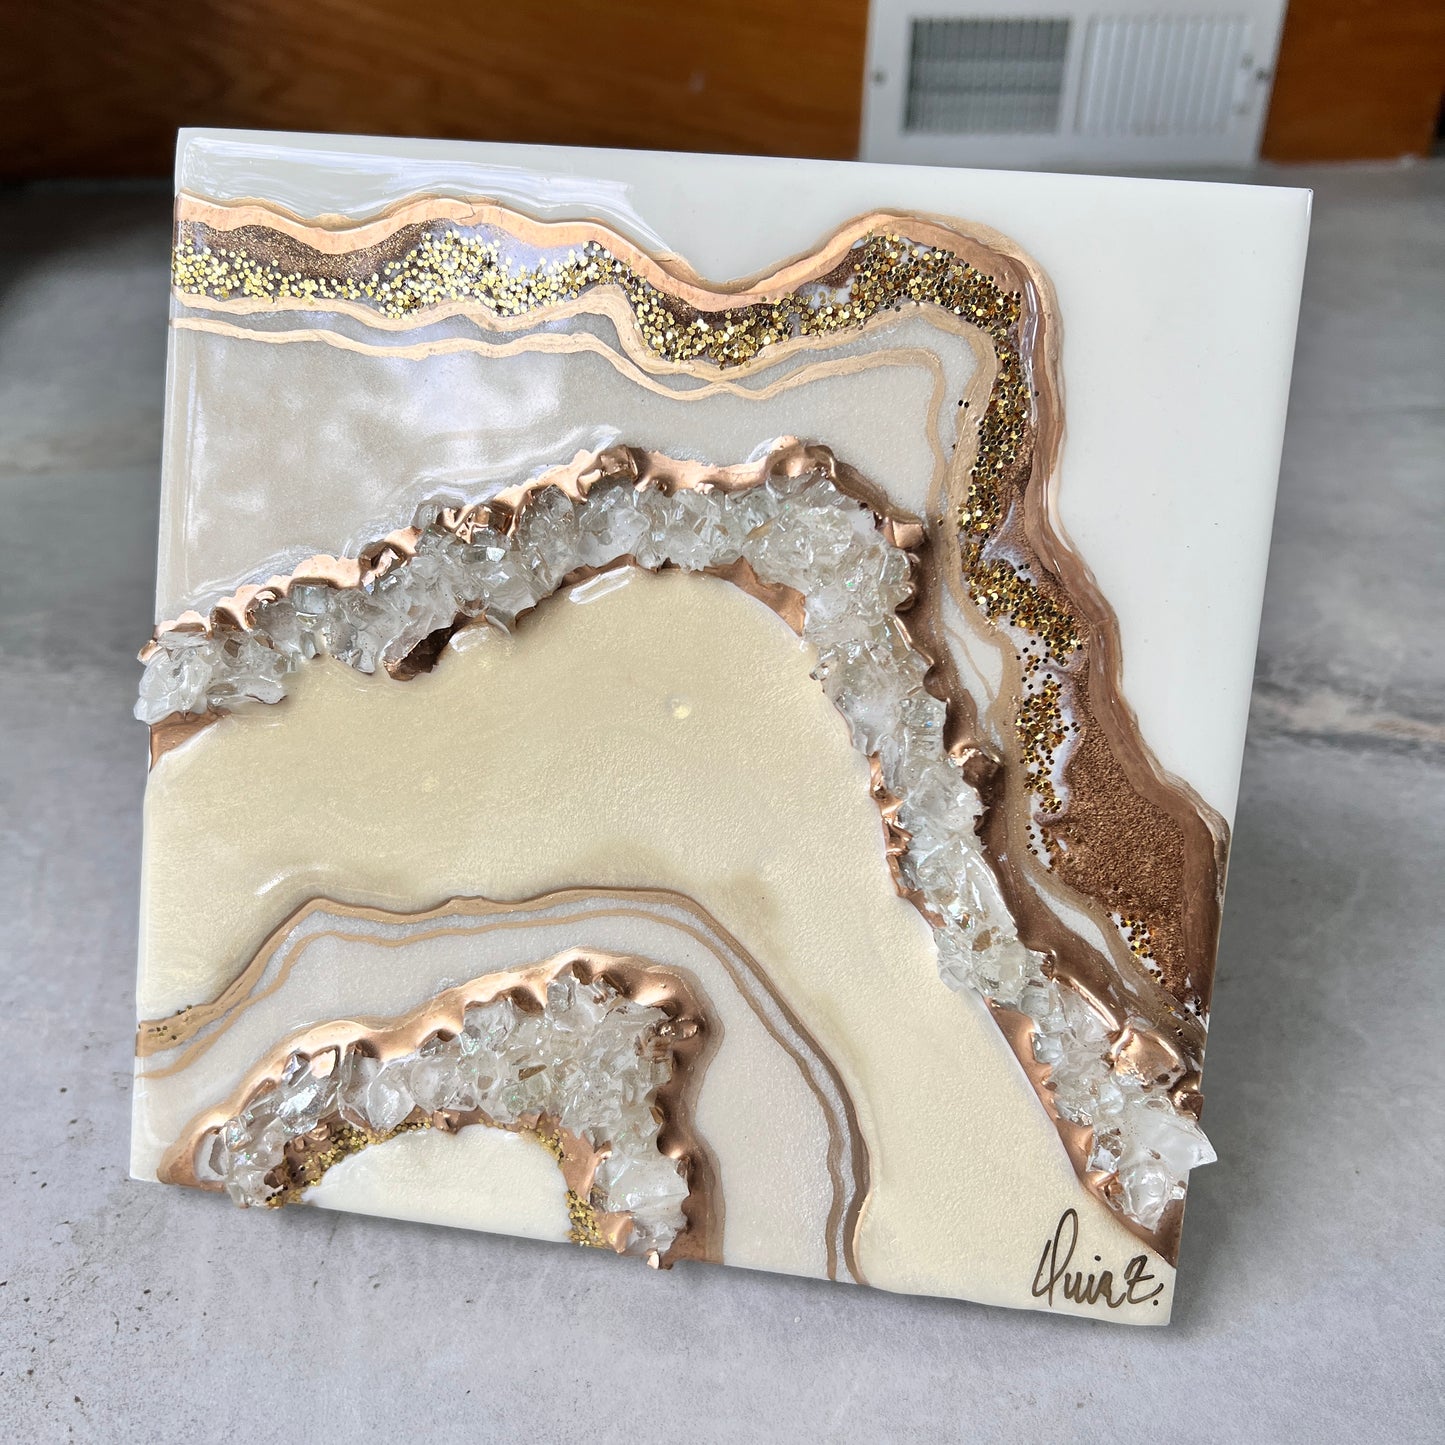 White & Gold Mini Geode Artwork with Stand